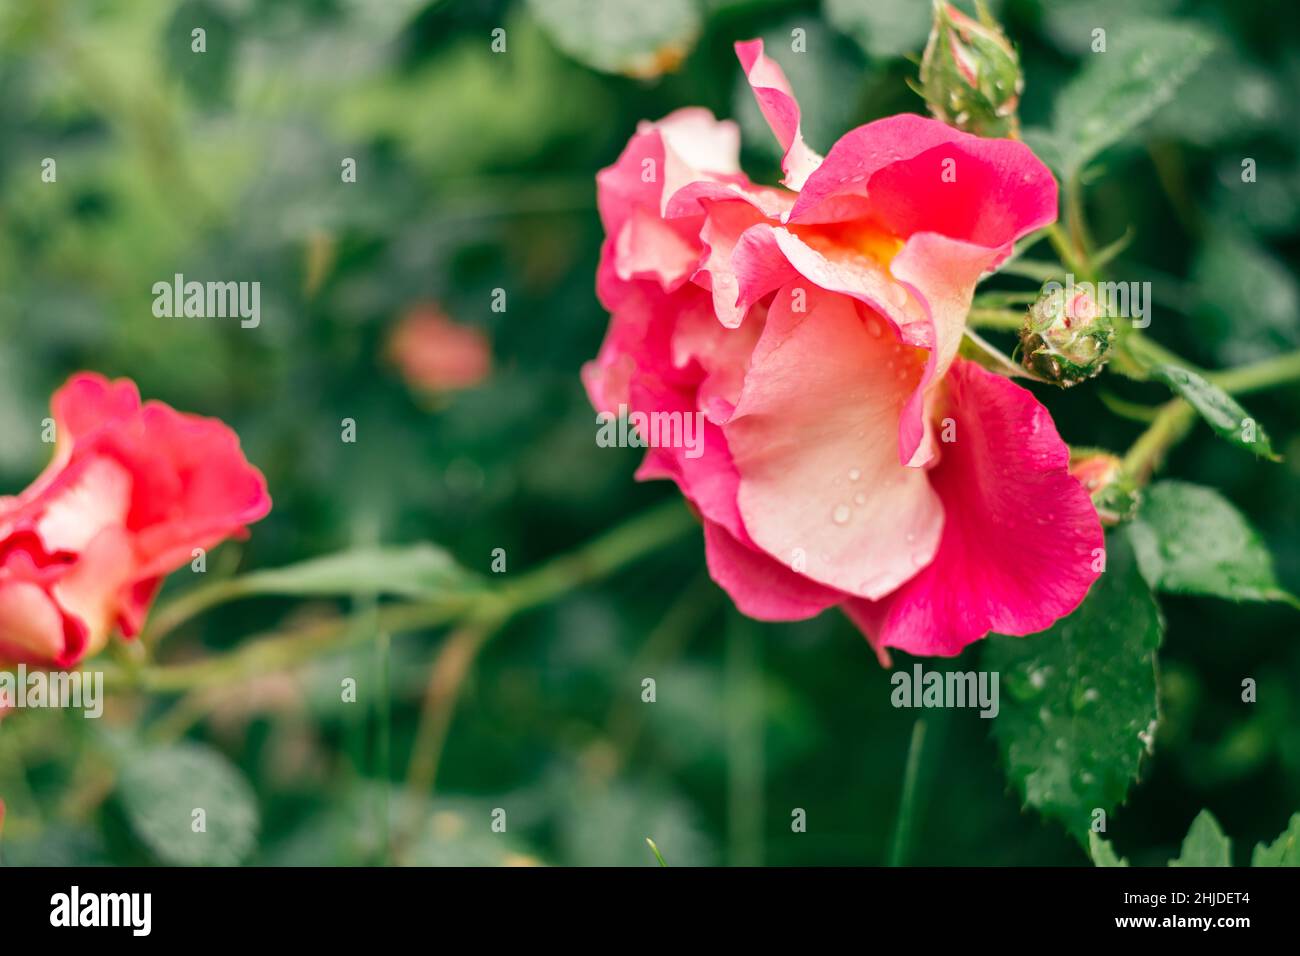 Close-up image of flower pink and white Bajazzo rose Large-Flowered Climber  with powerful scent on green plant blurred background. Big pattern petals  Stock Photo - Alamy